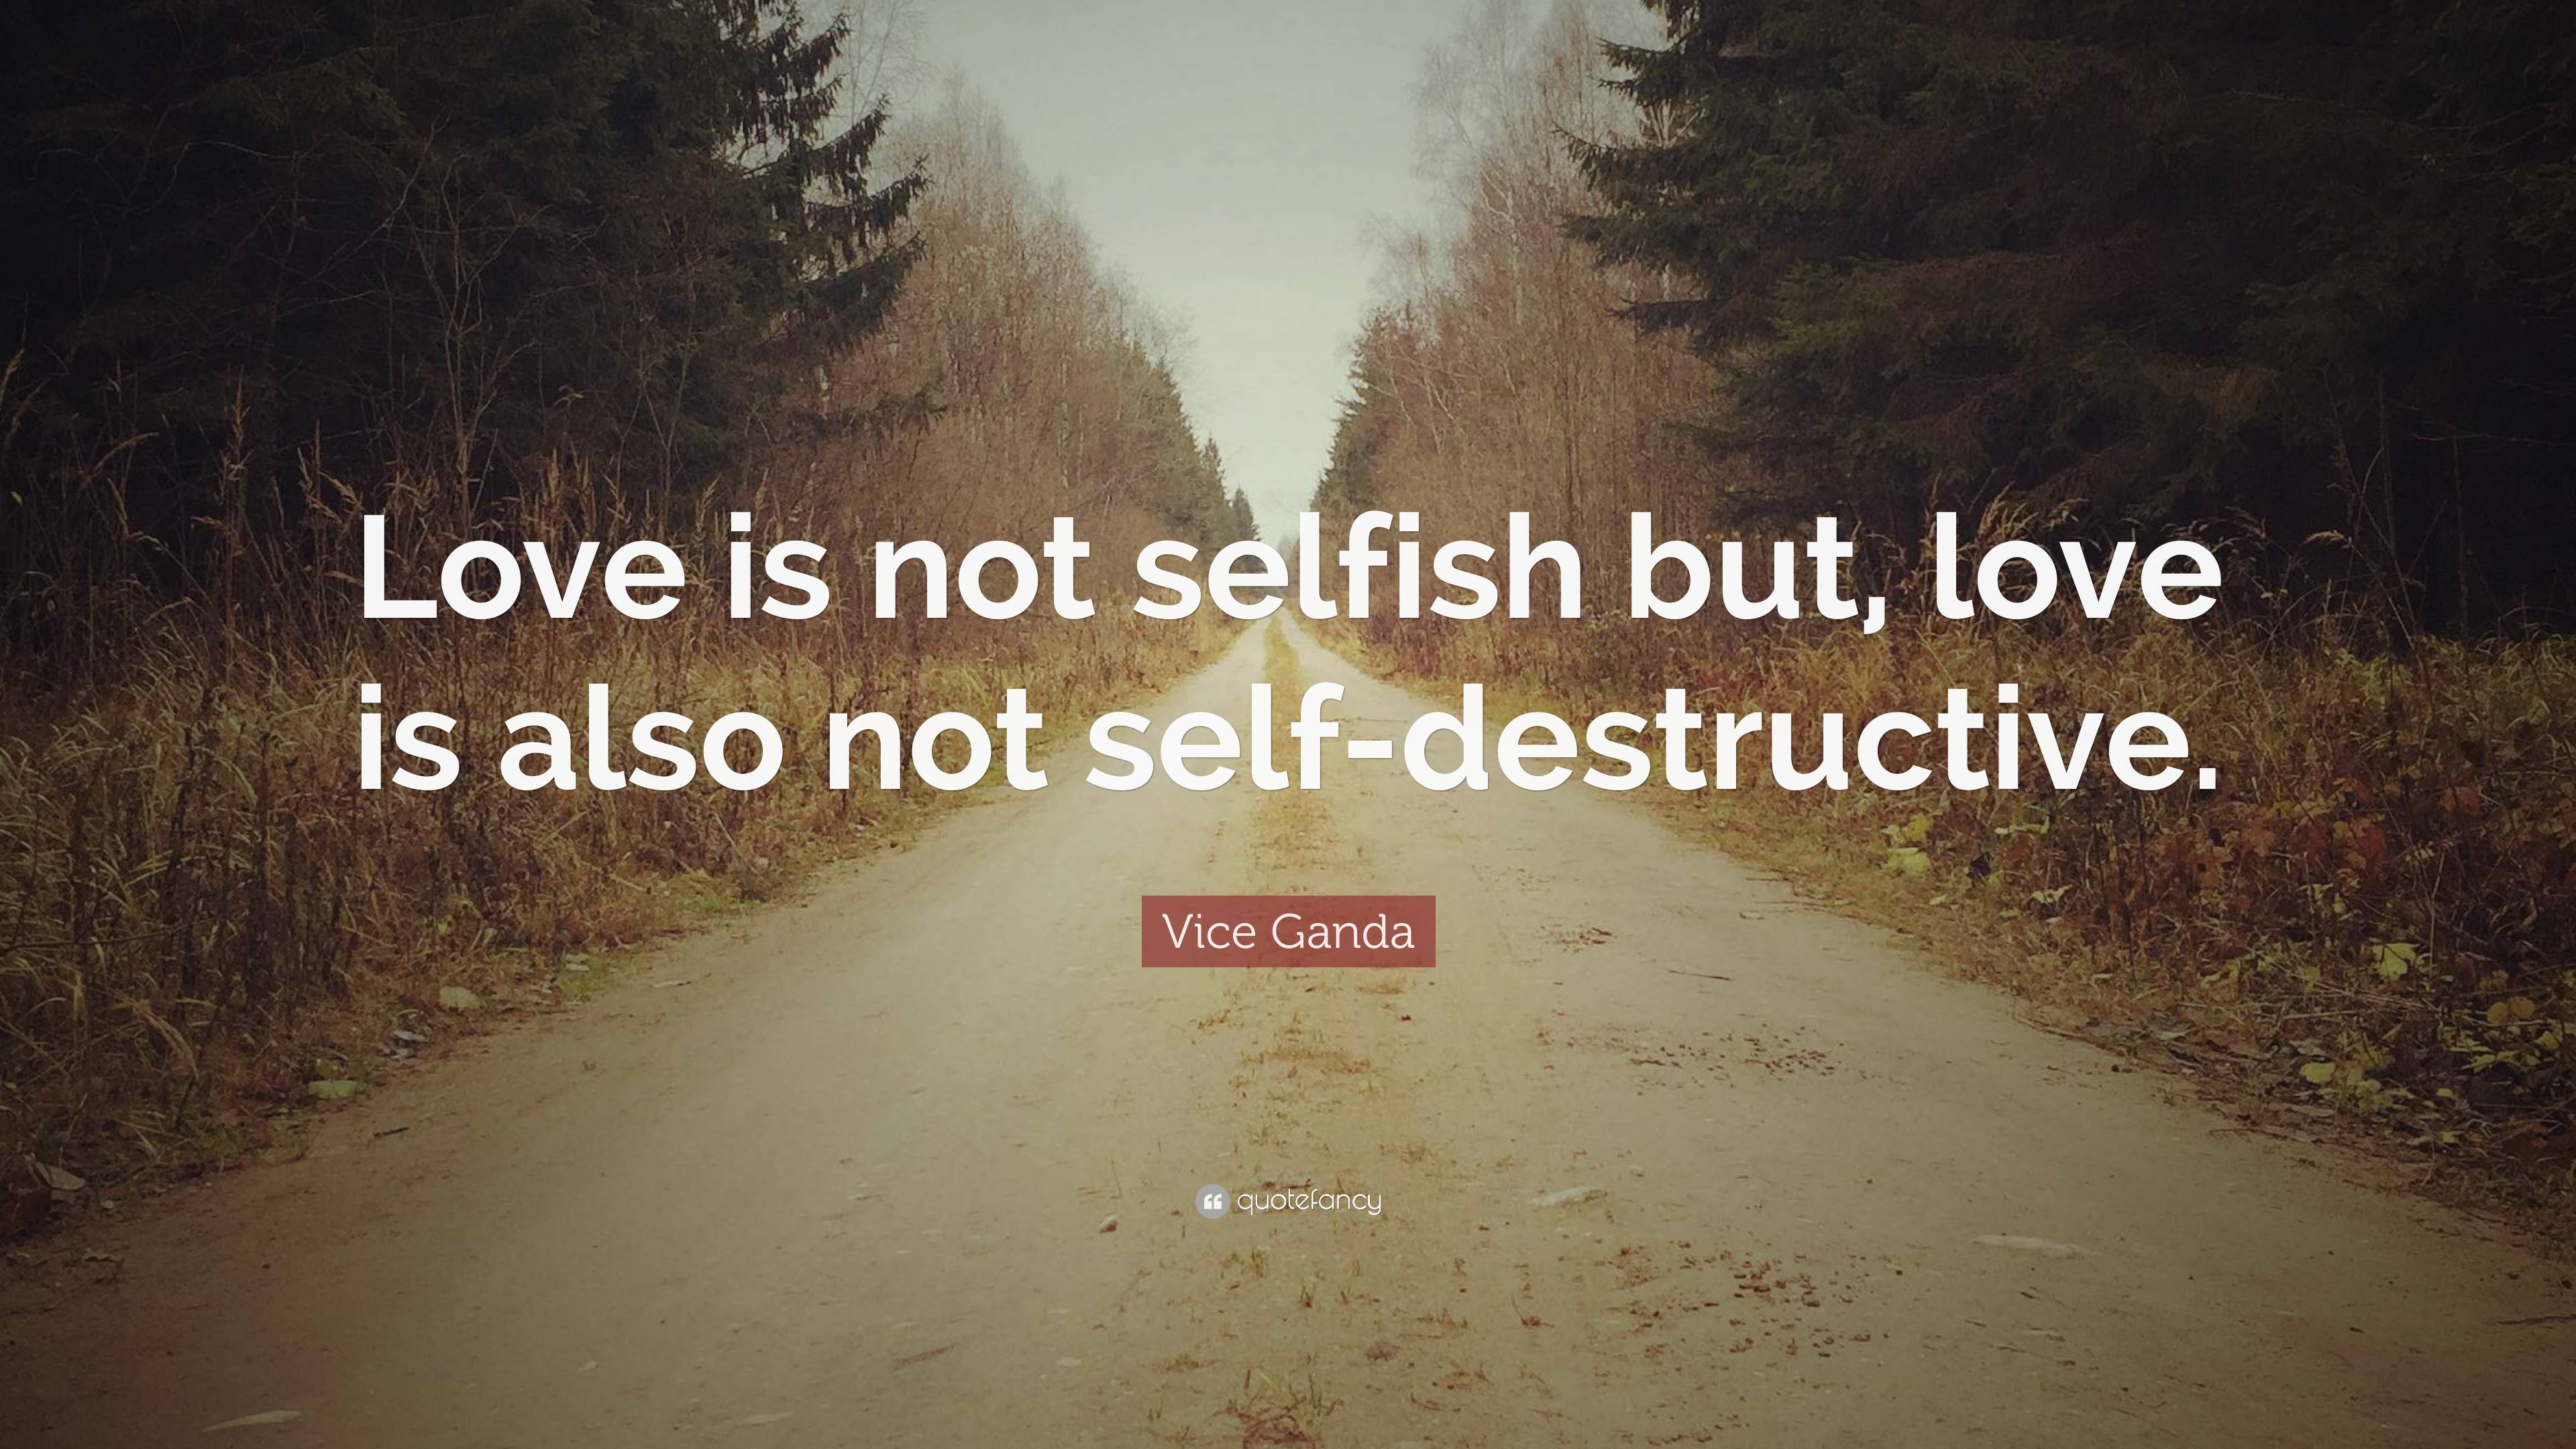 Vice Ganda Quote: “Love is not selfish but, love is also not self ...